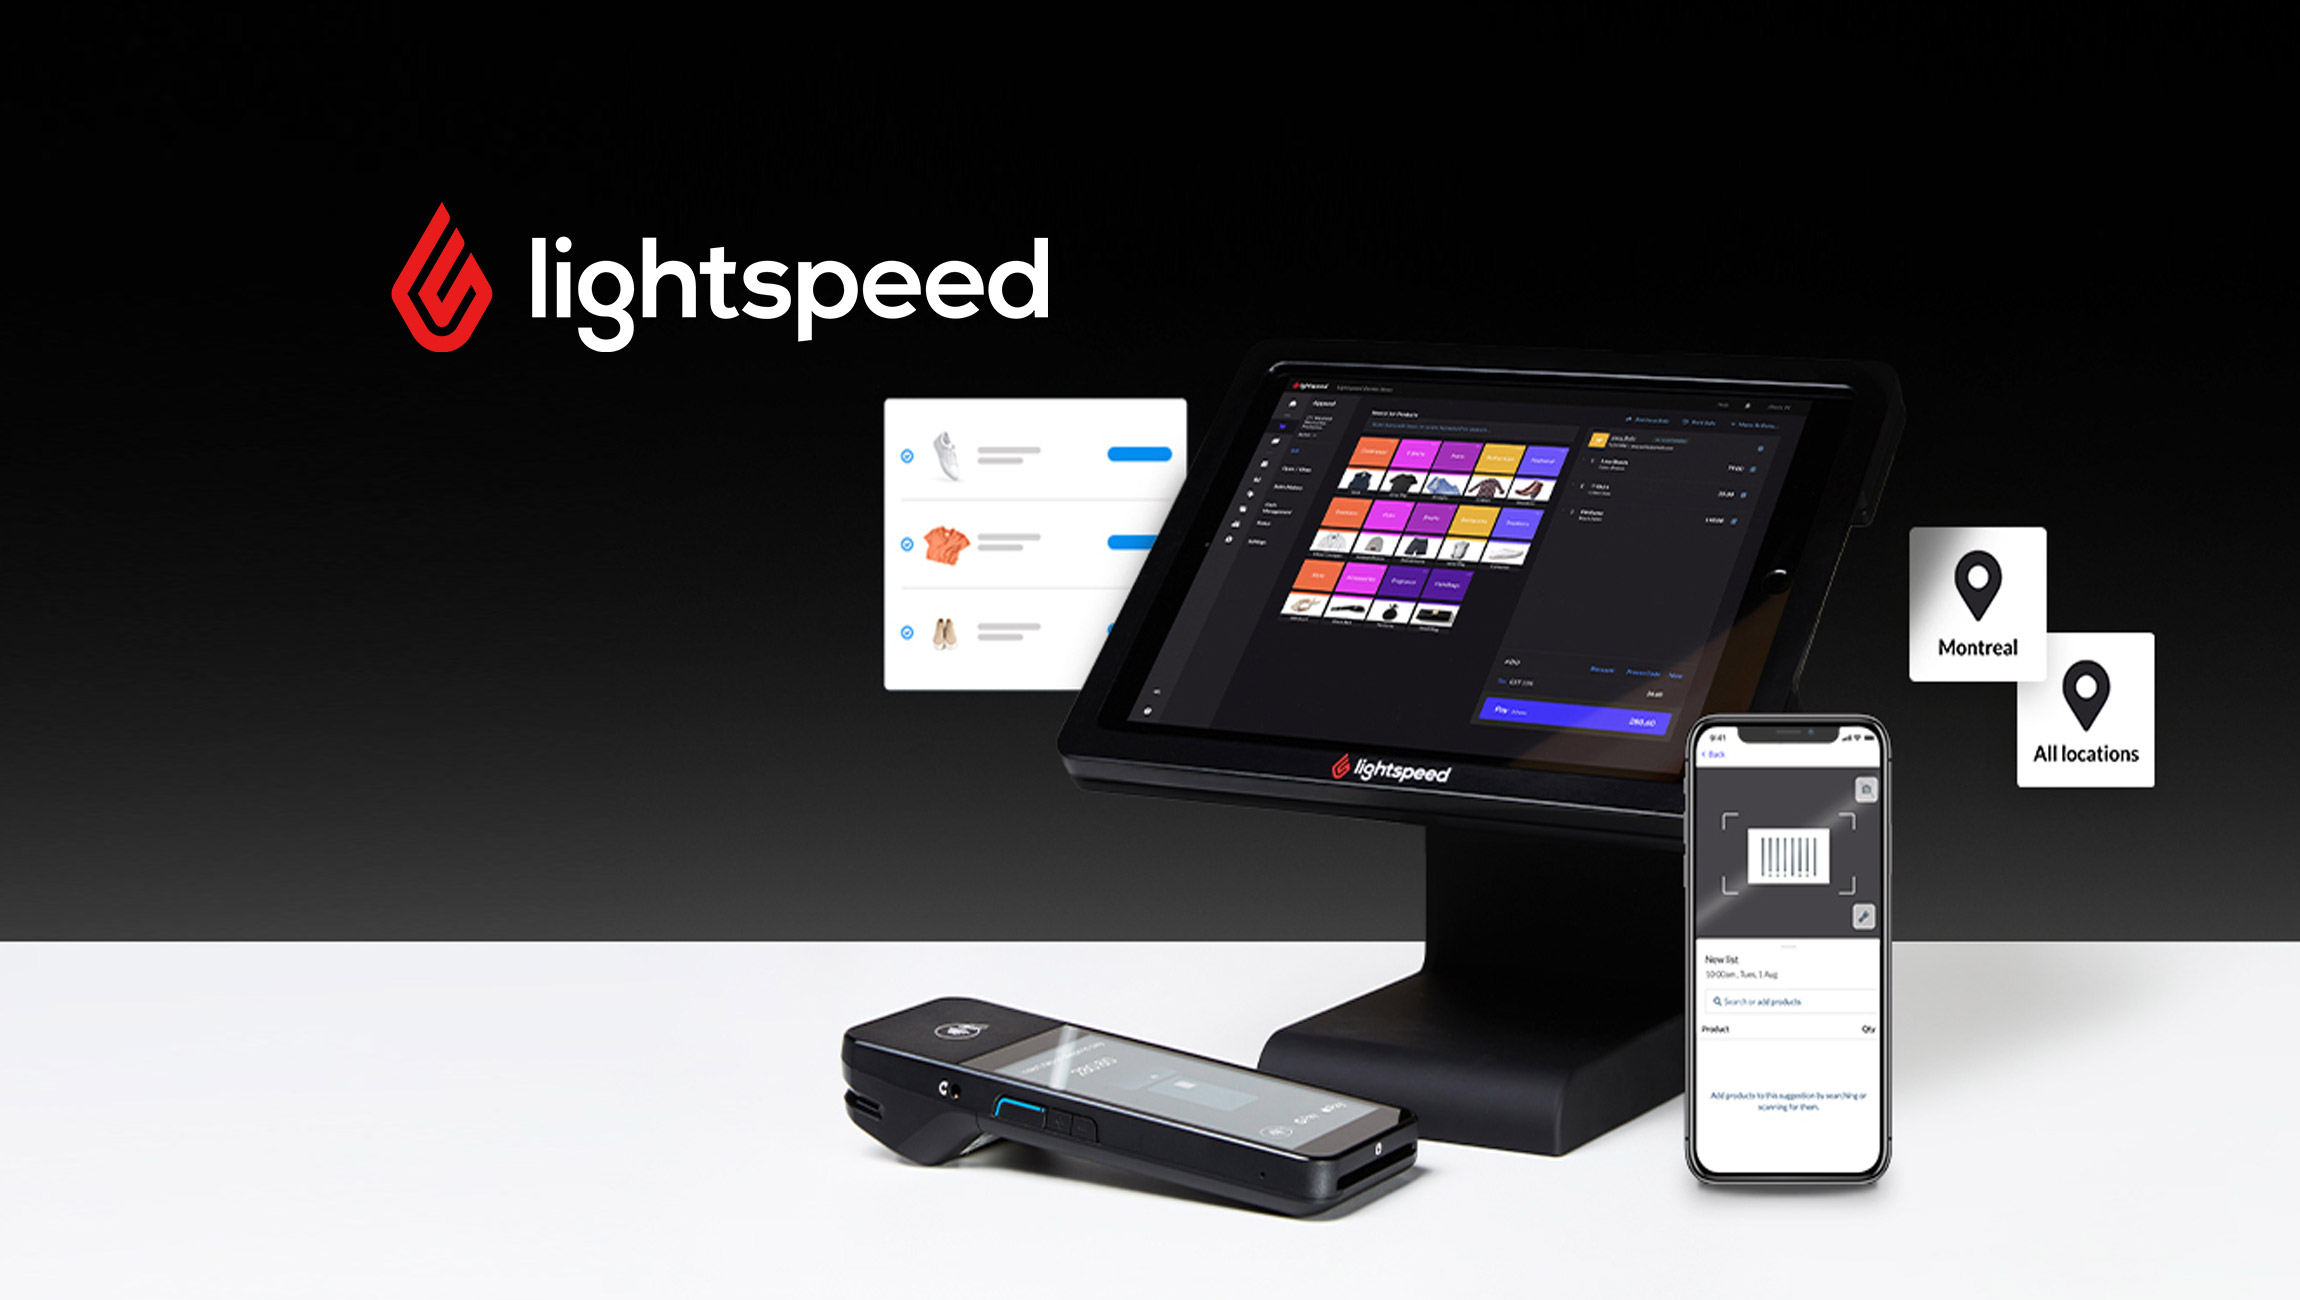 Lightspeed Launches Gamechanging New Features for Sophisticated Omnichannel Retailers Navigating Today’s Sink-Or-Swim Economy